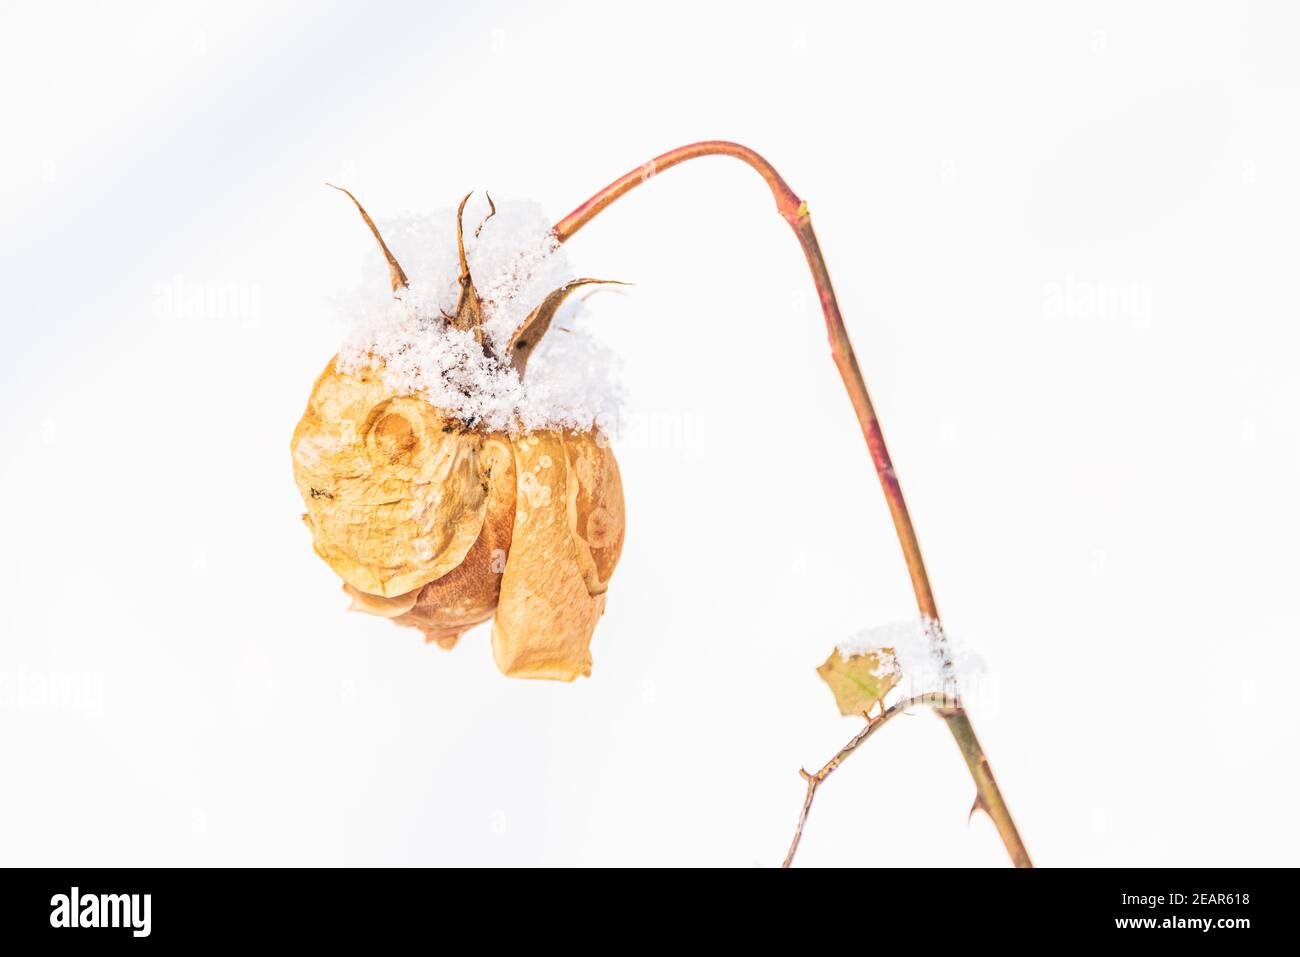 A yellow dried rose against the backdrop of a snowy hill. Winter abstract, Anti-Valentine's Day theme - scenery with a single flower and snow. Stock Photo